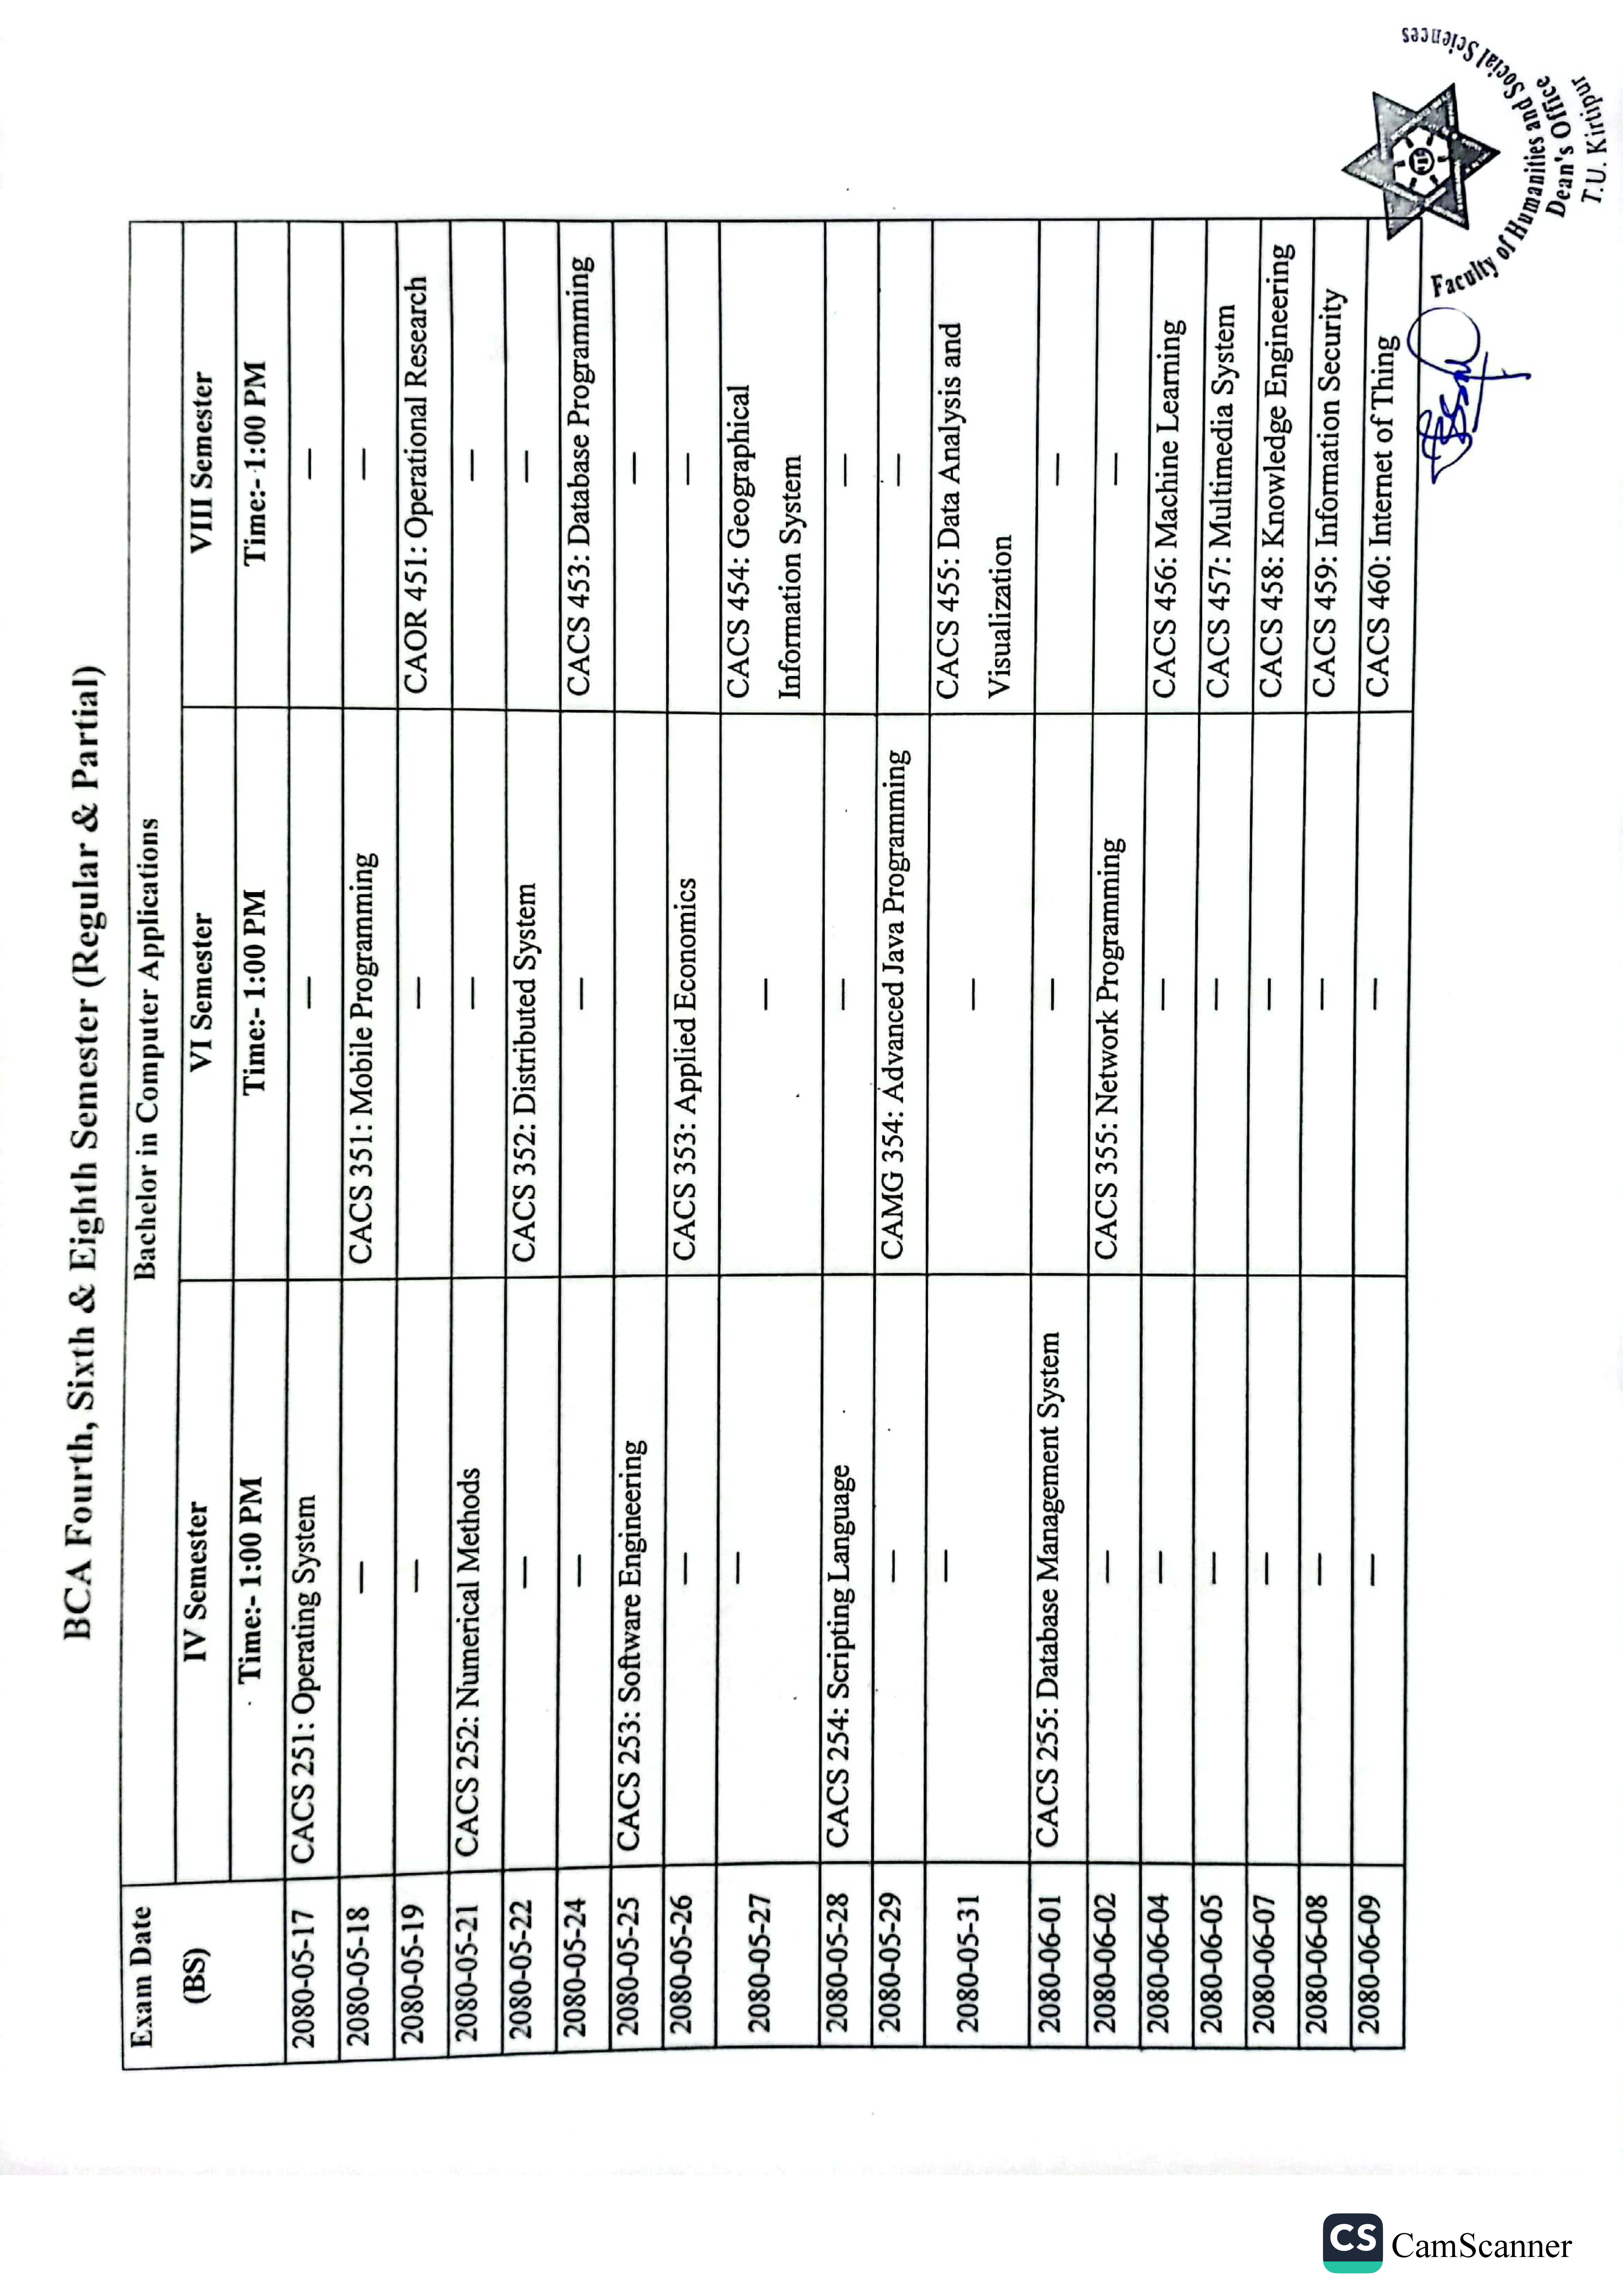 Examination schedule of BCA 4th, 6th and 8th Semester 2080 BS